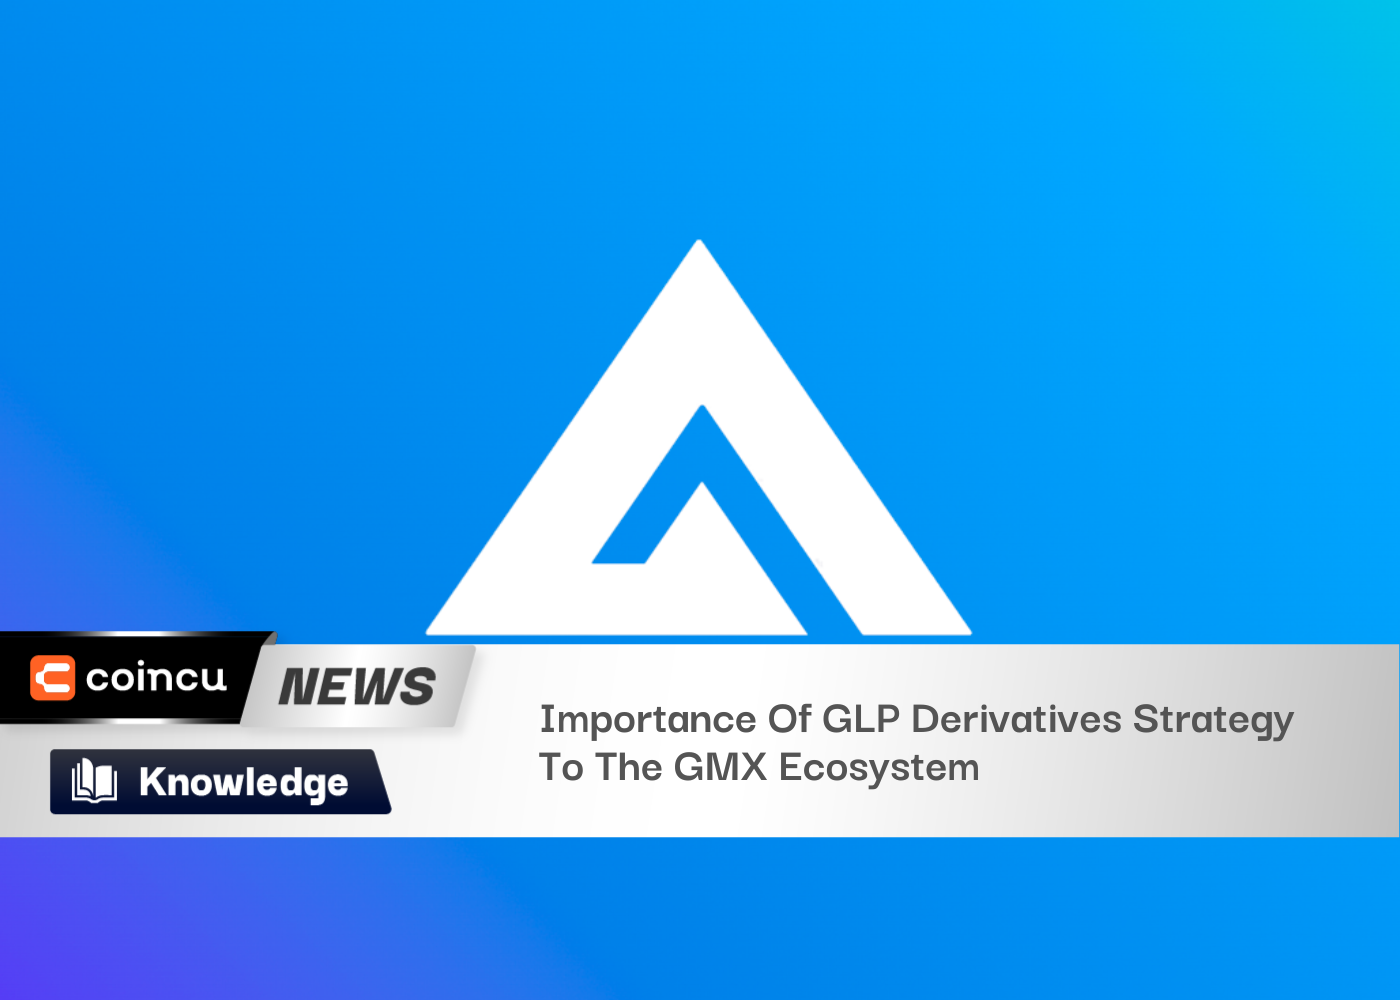 Importance Of GLP Derivatives Strategy To The GMX Ecosystem